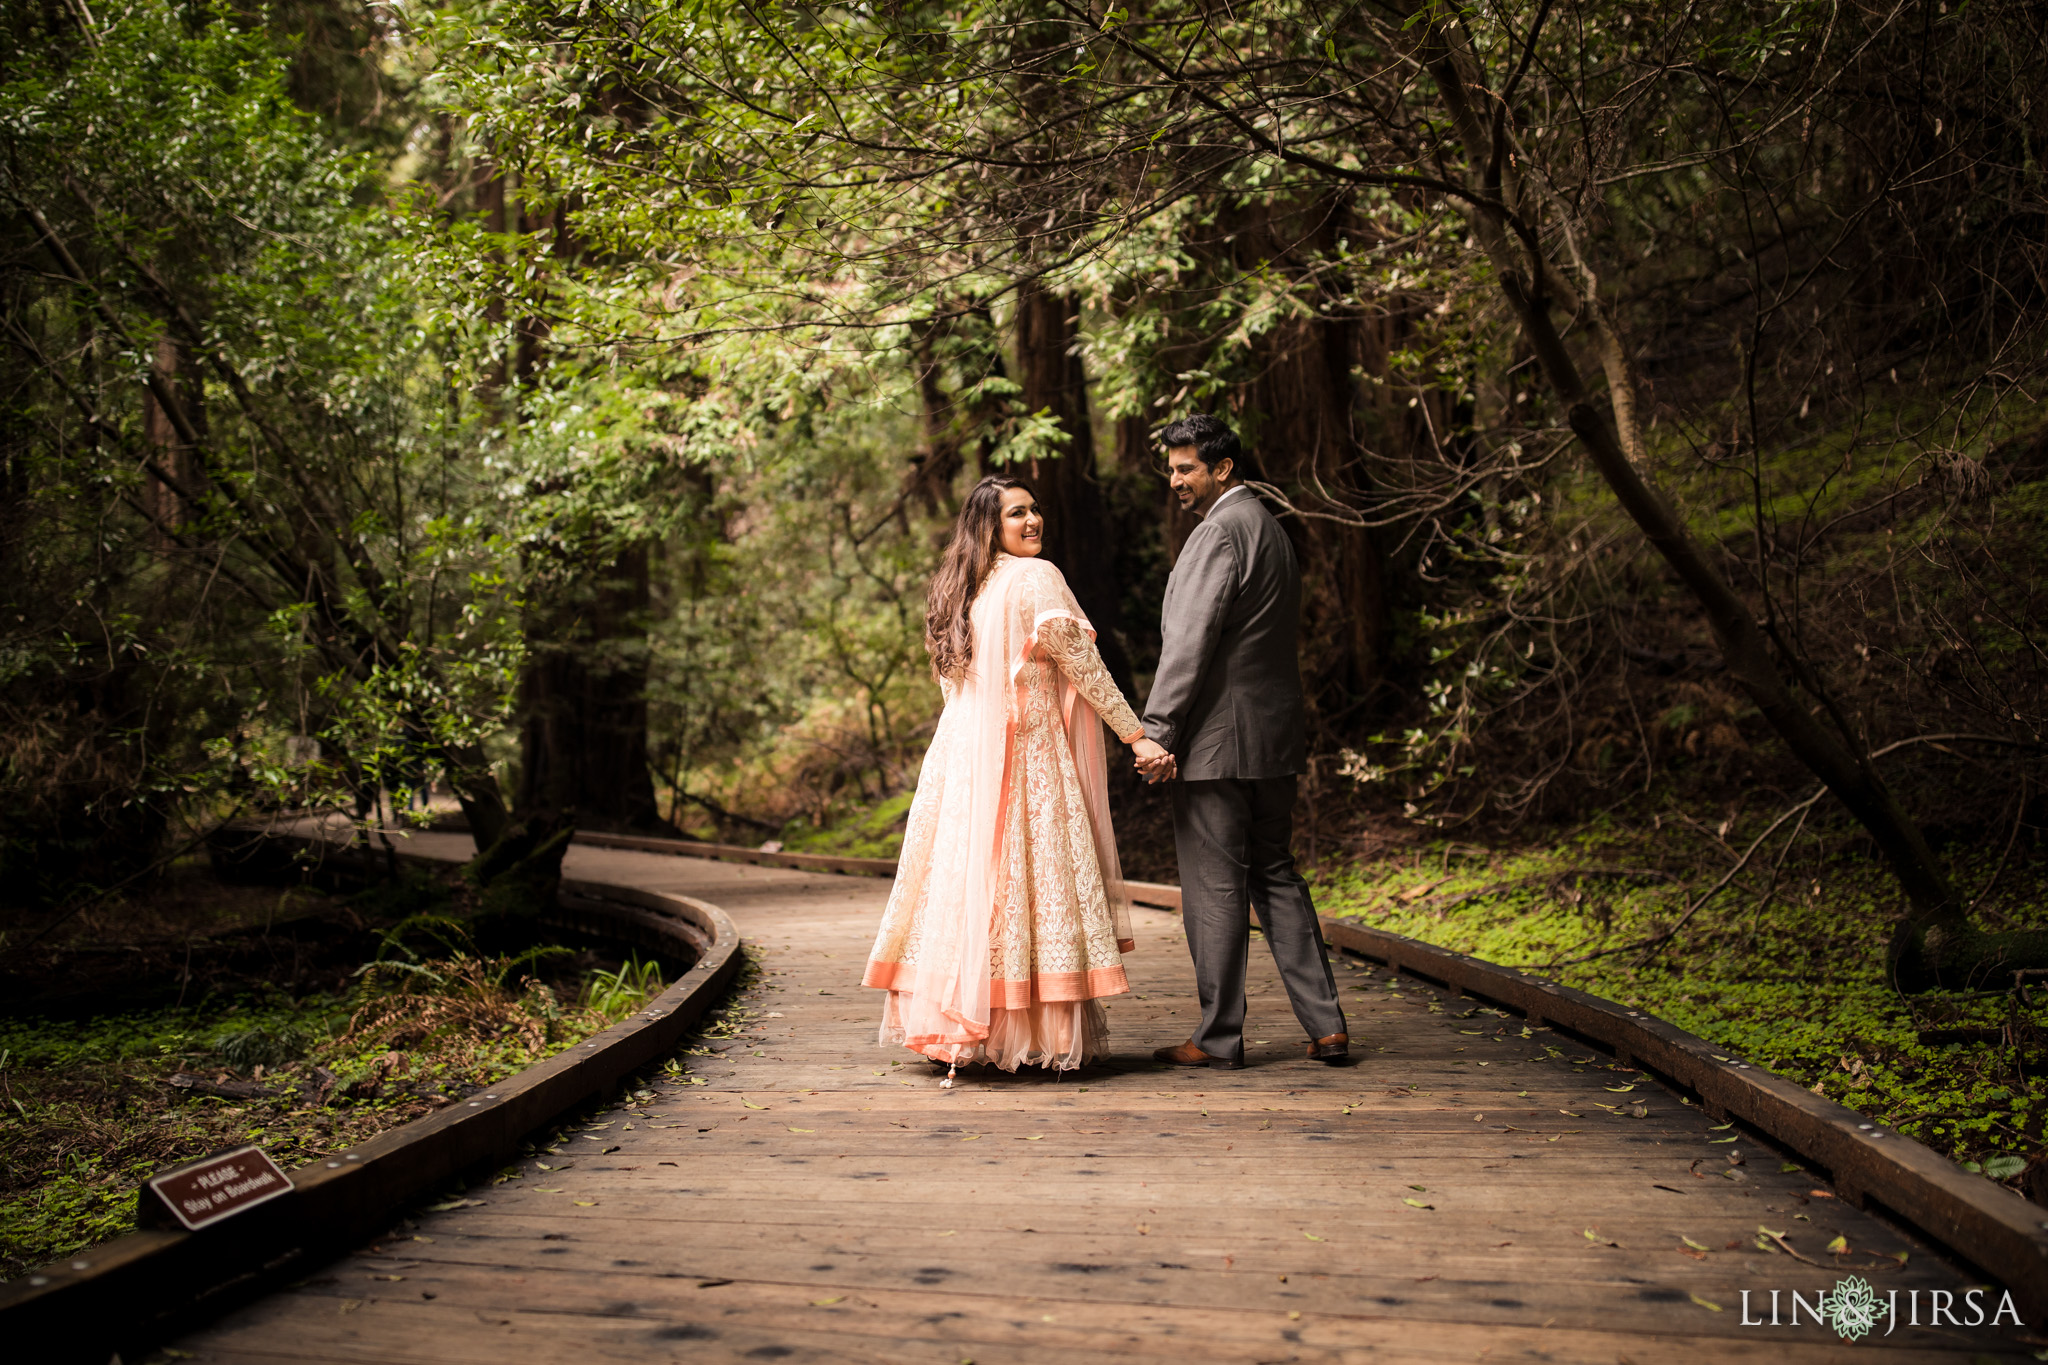 02-San-francisco-muir-woods-marin-county-engagement-photography